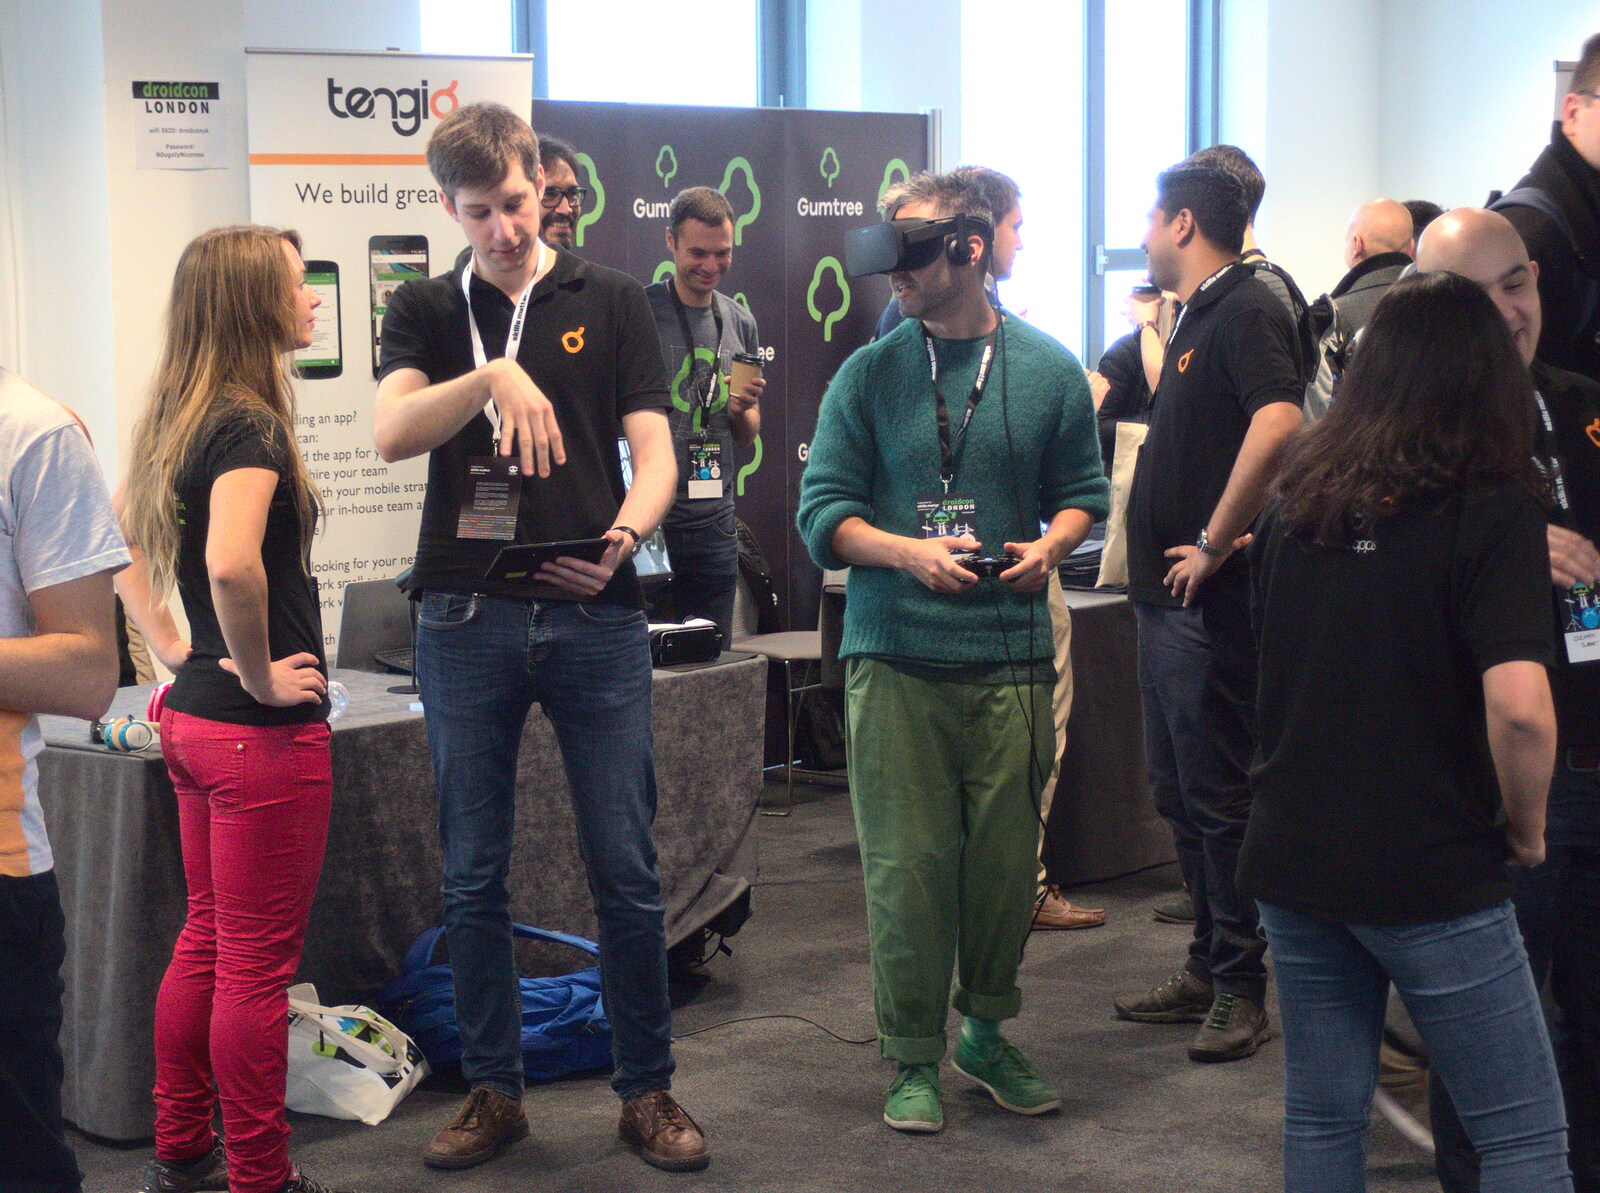 A spot of VR goes on from Droidcon 2016, Islington, London - 27th October 2016